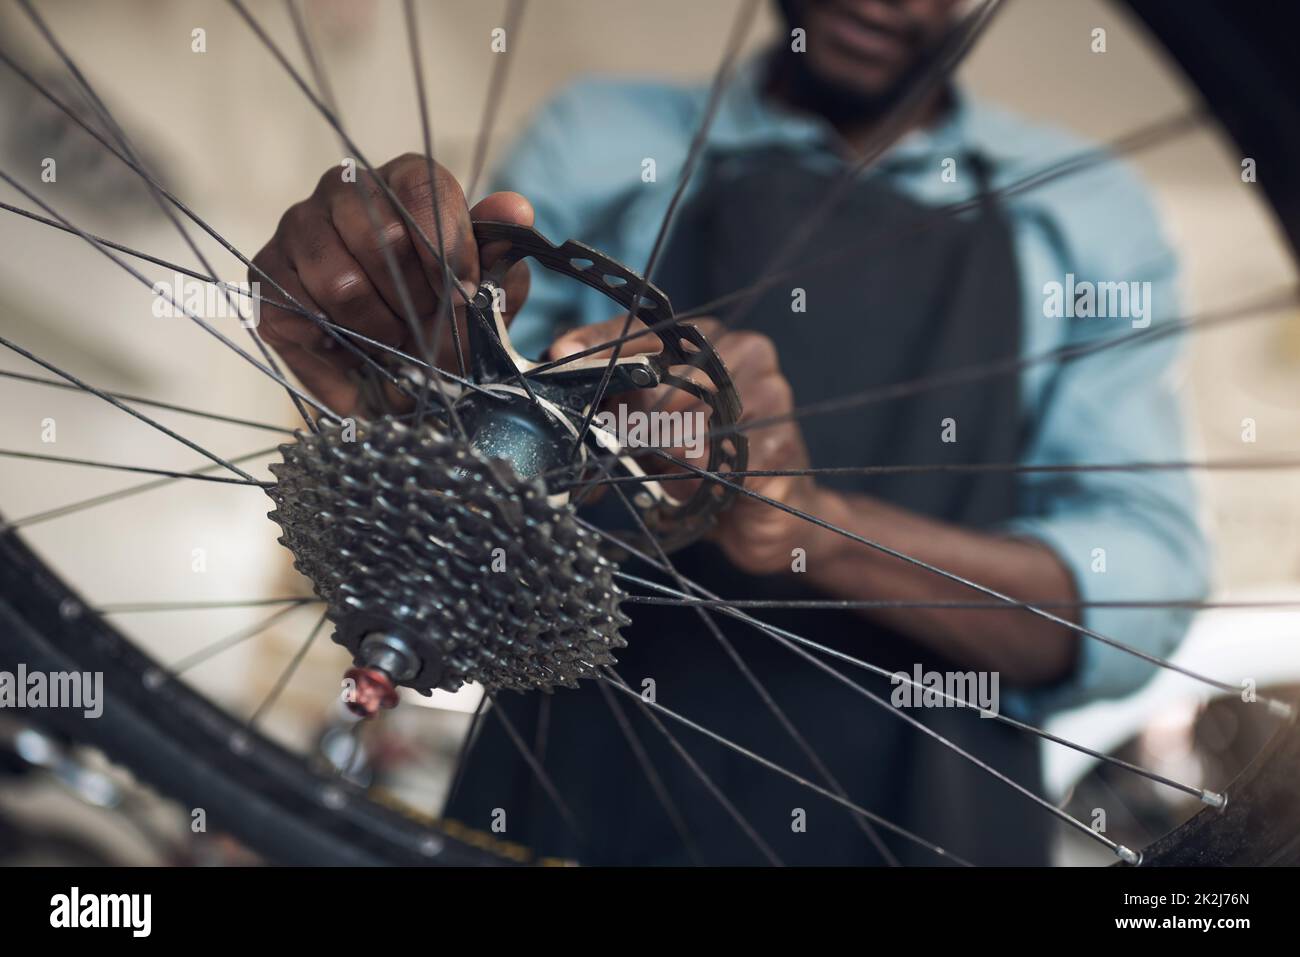 Youre almost ready for another generation of memories. Low angle shot of an unrecognizable man standing alone in his shop and repairing a bicycle wheel. Stock Photo